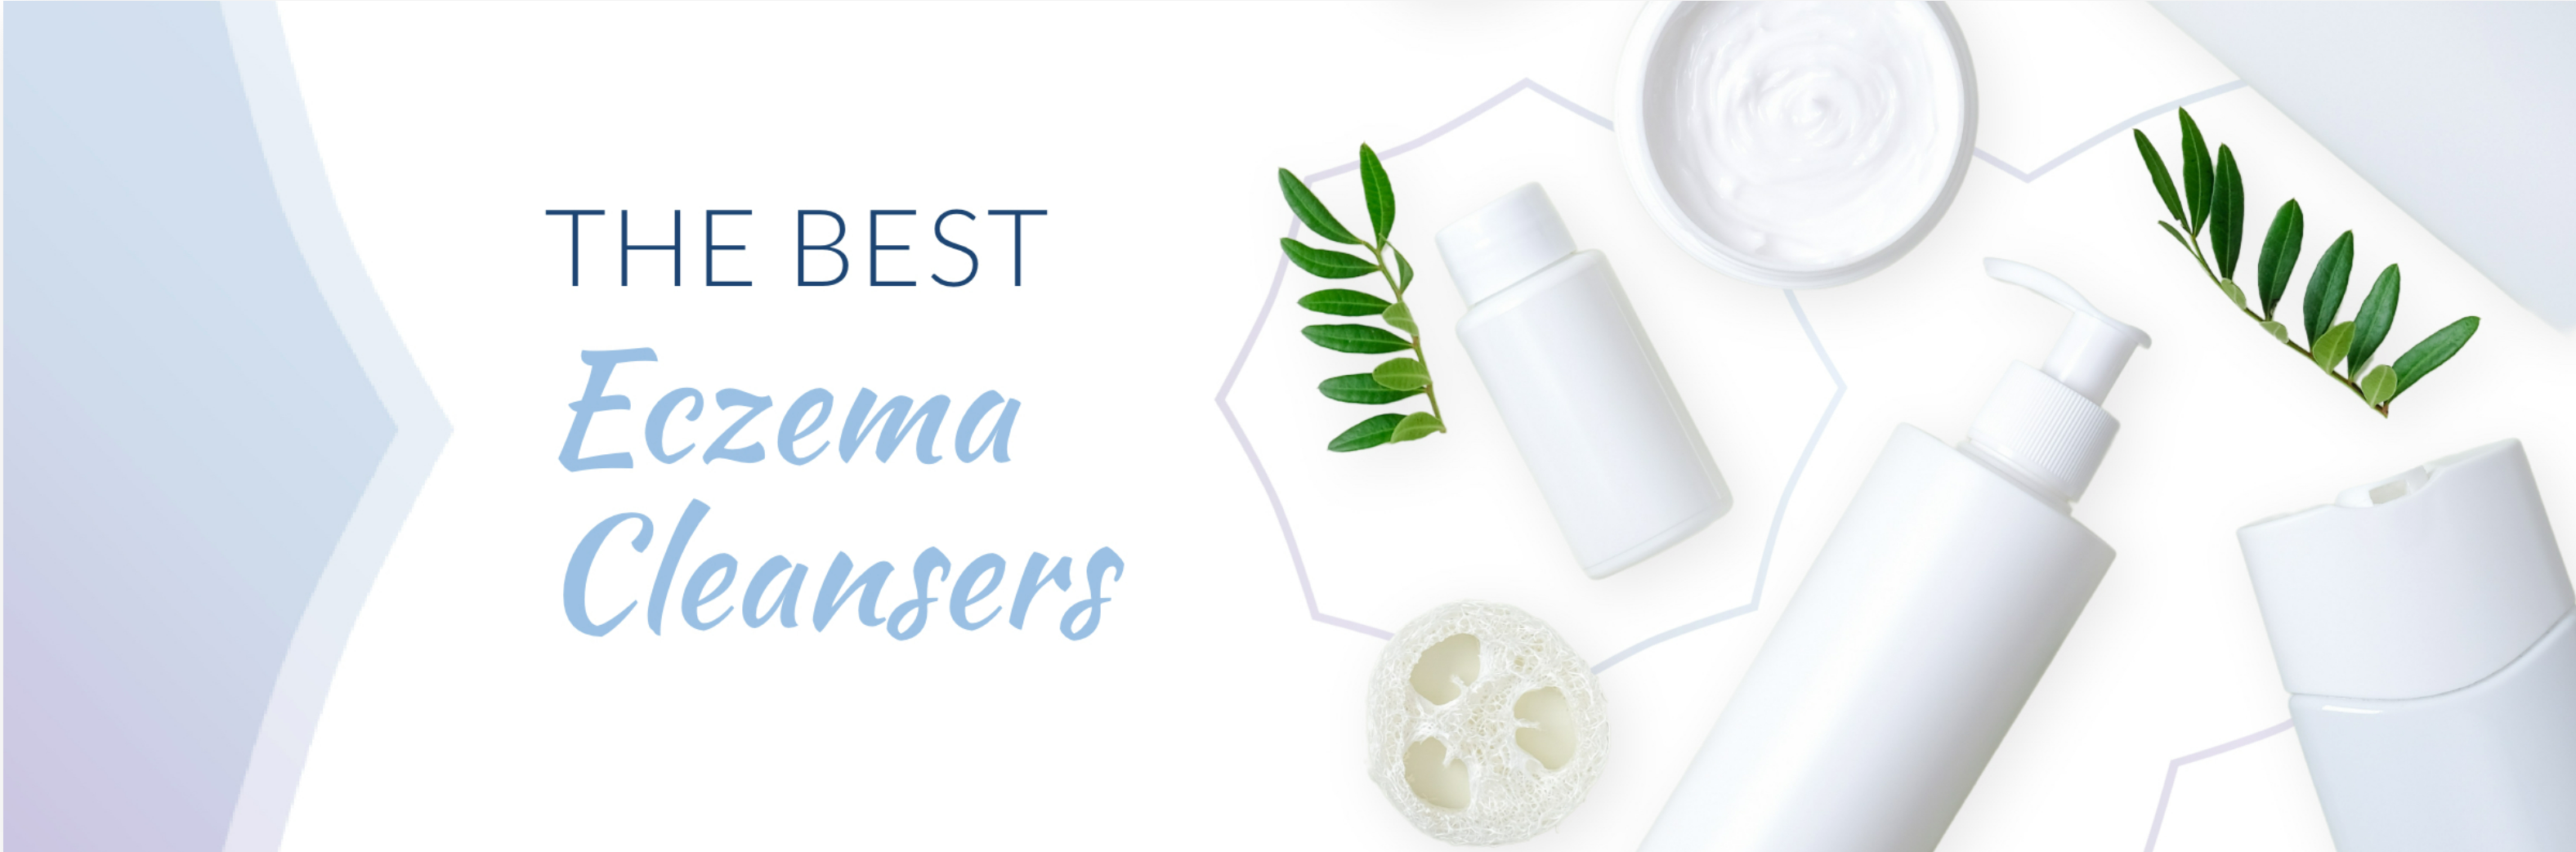 the best eczema cleansers